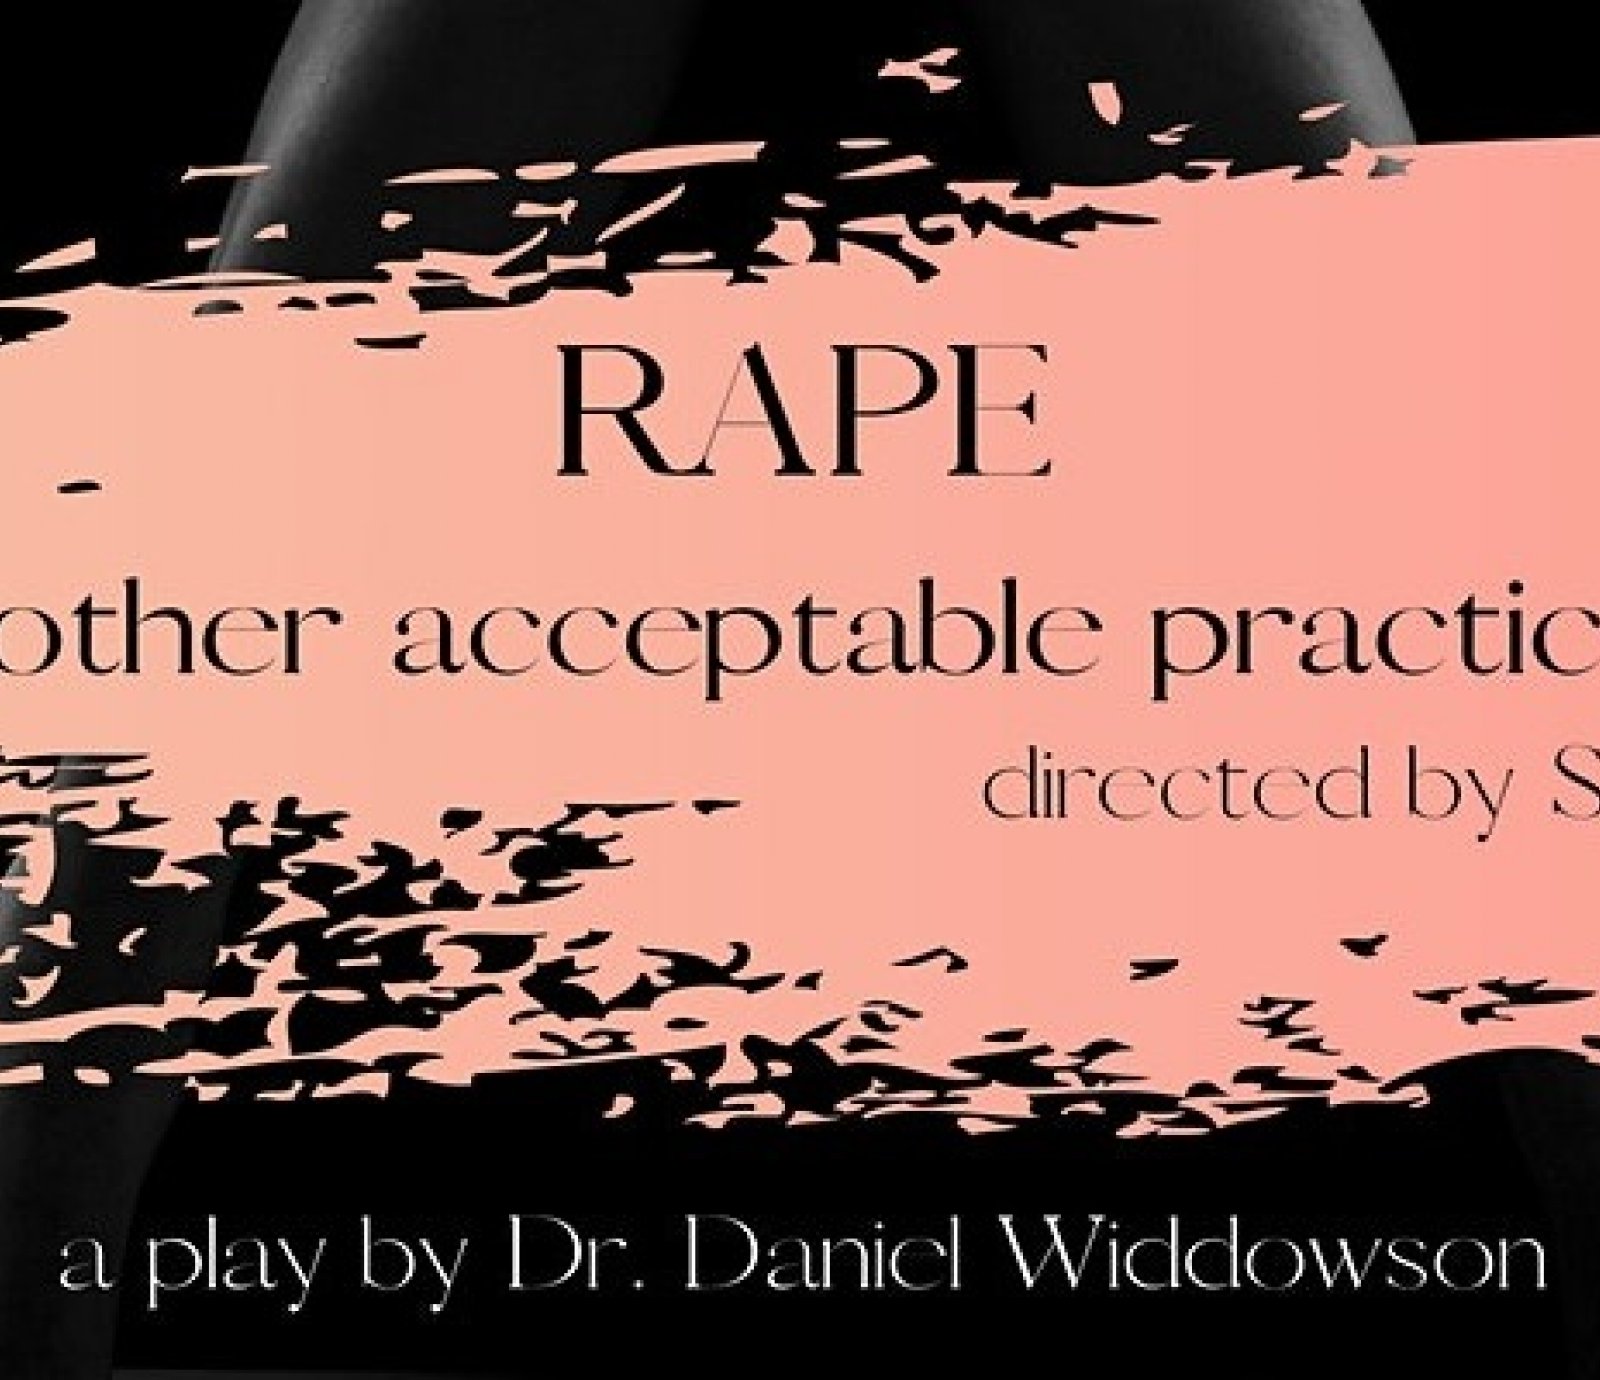 Rape & Other "acceptable" Practices